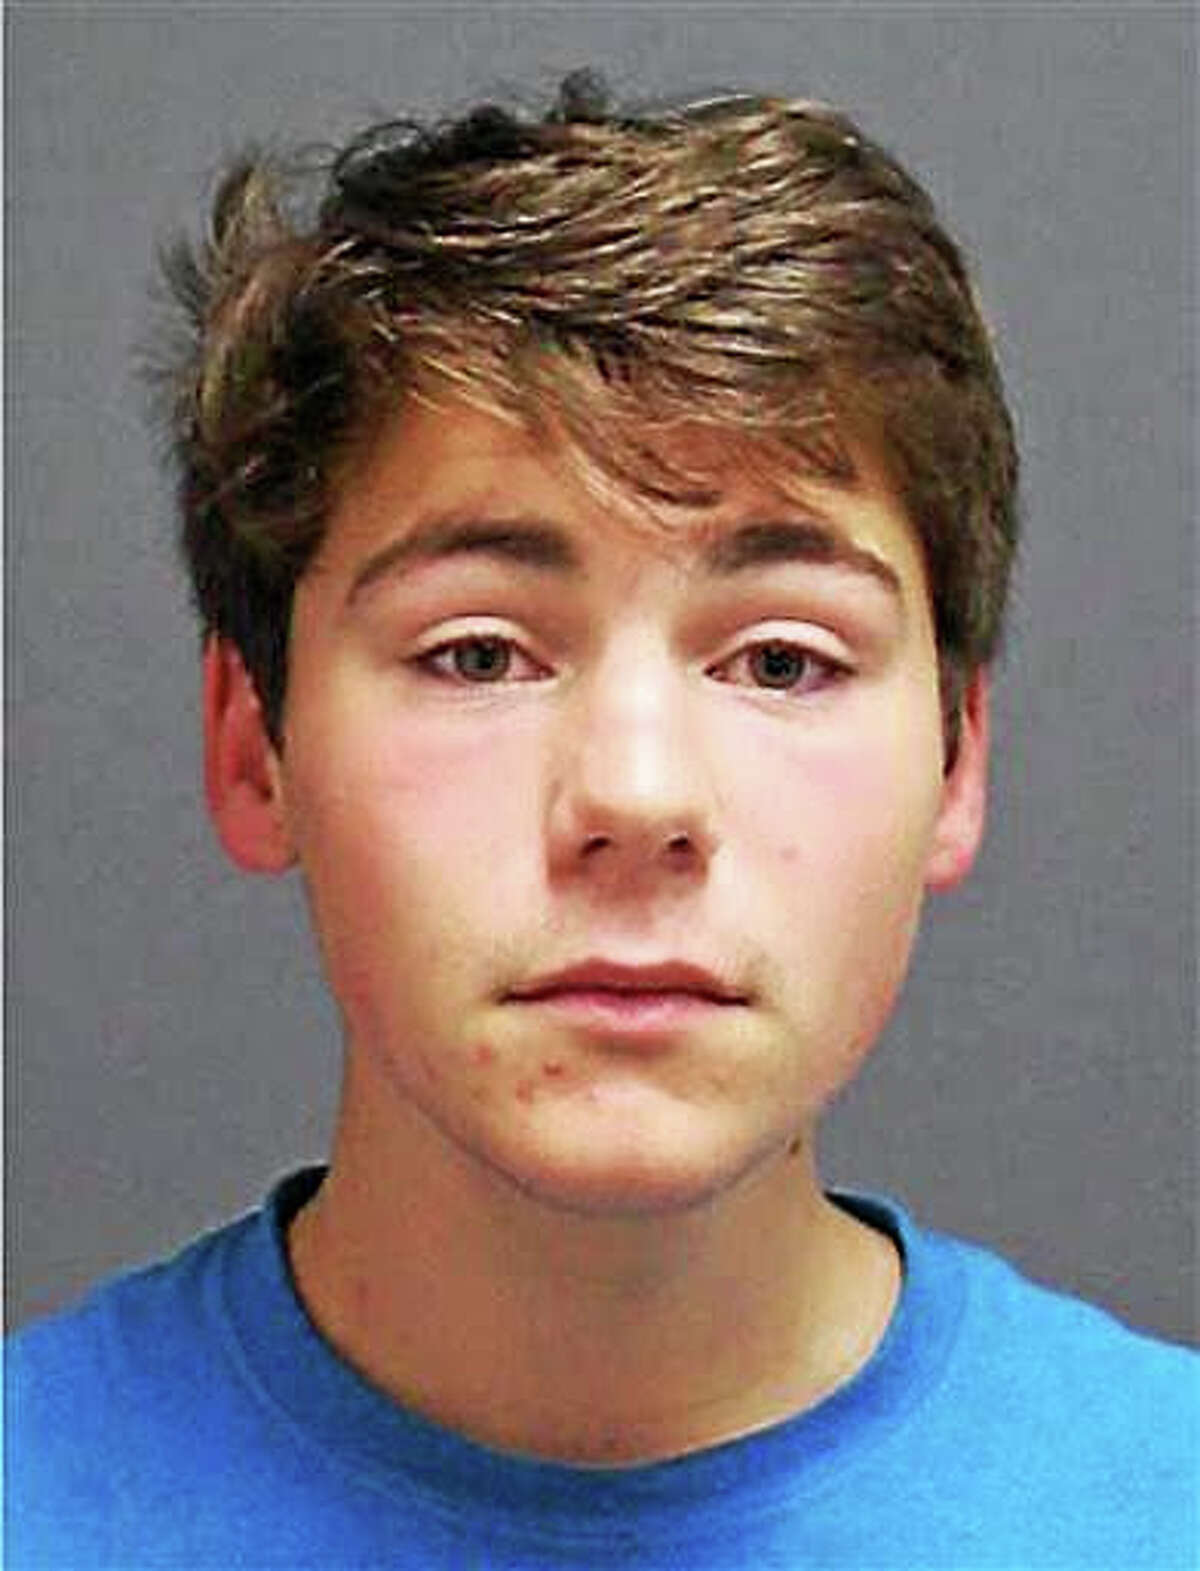 This undated file photo provided by the University of Connecticut police department shows student Luke Gatti, 19, of Bayville, N.Y. He was arrested Oct. 4, 2015, following an altercation over purchasing macaroni and cheese at a market on the school’s Storrs, Conn. campus.